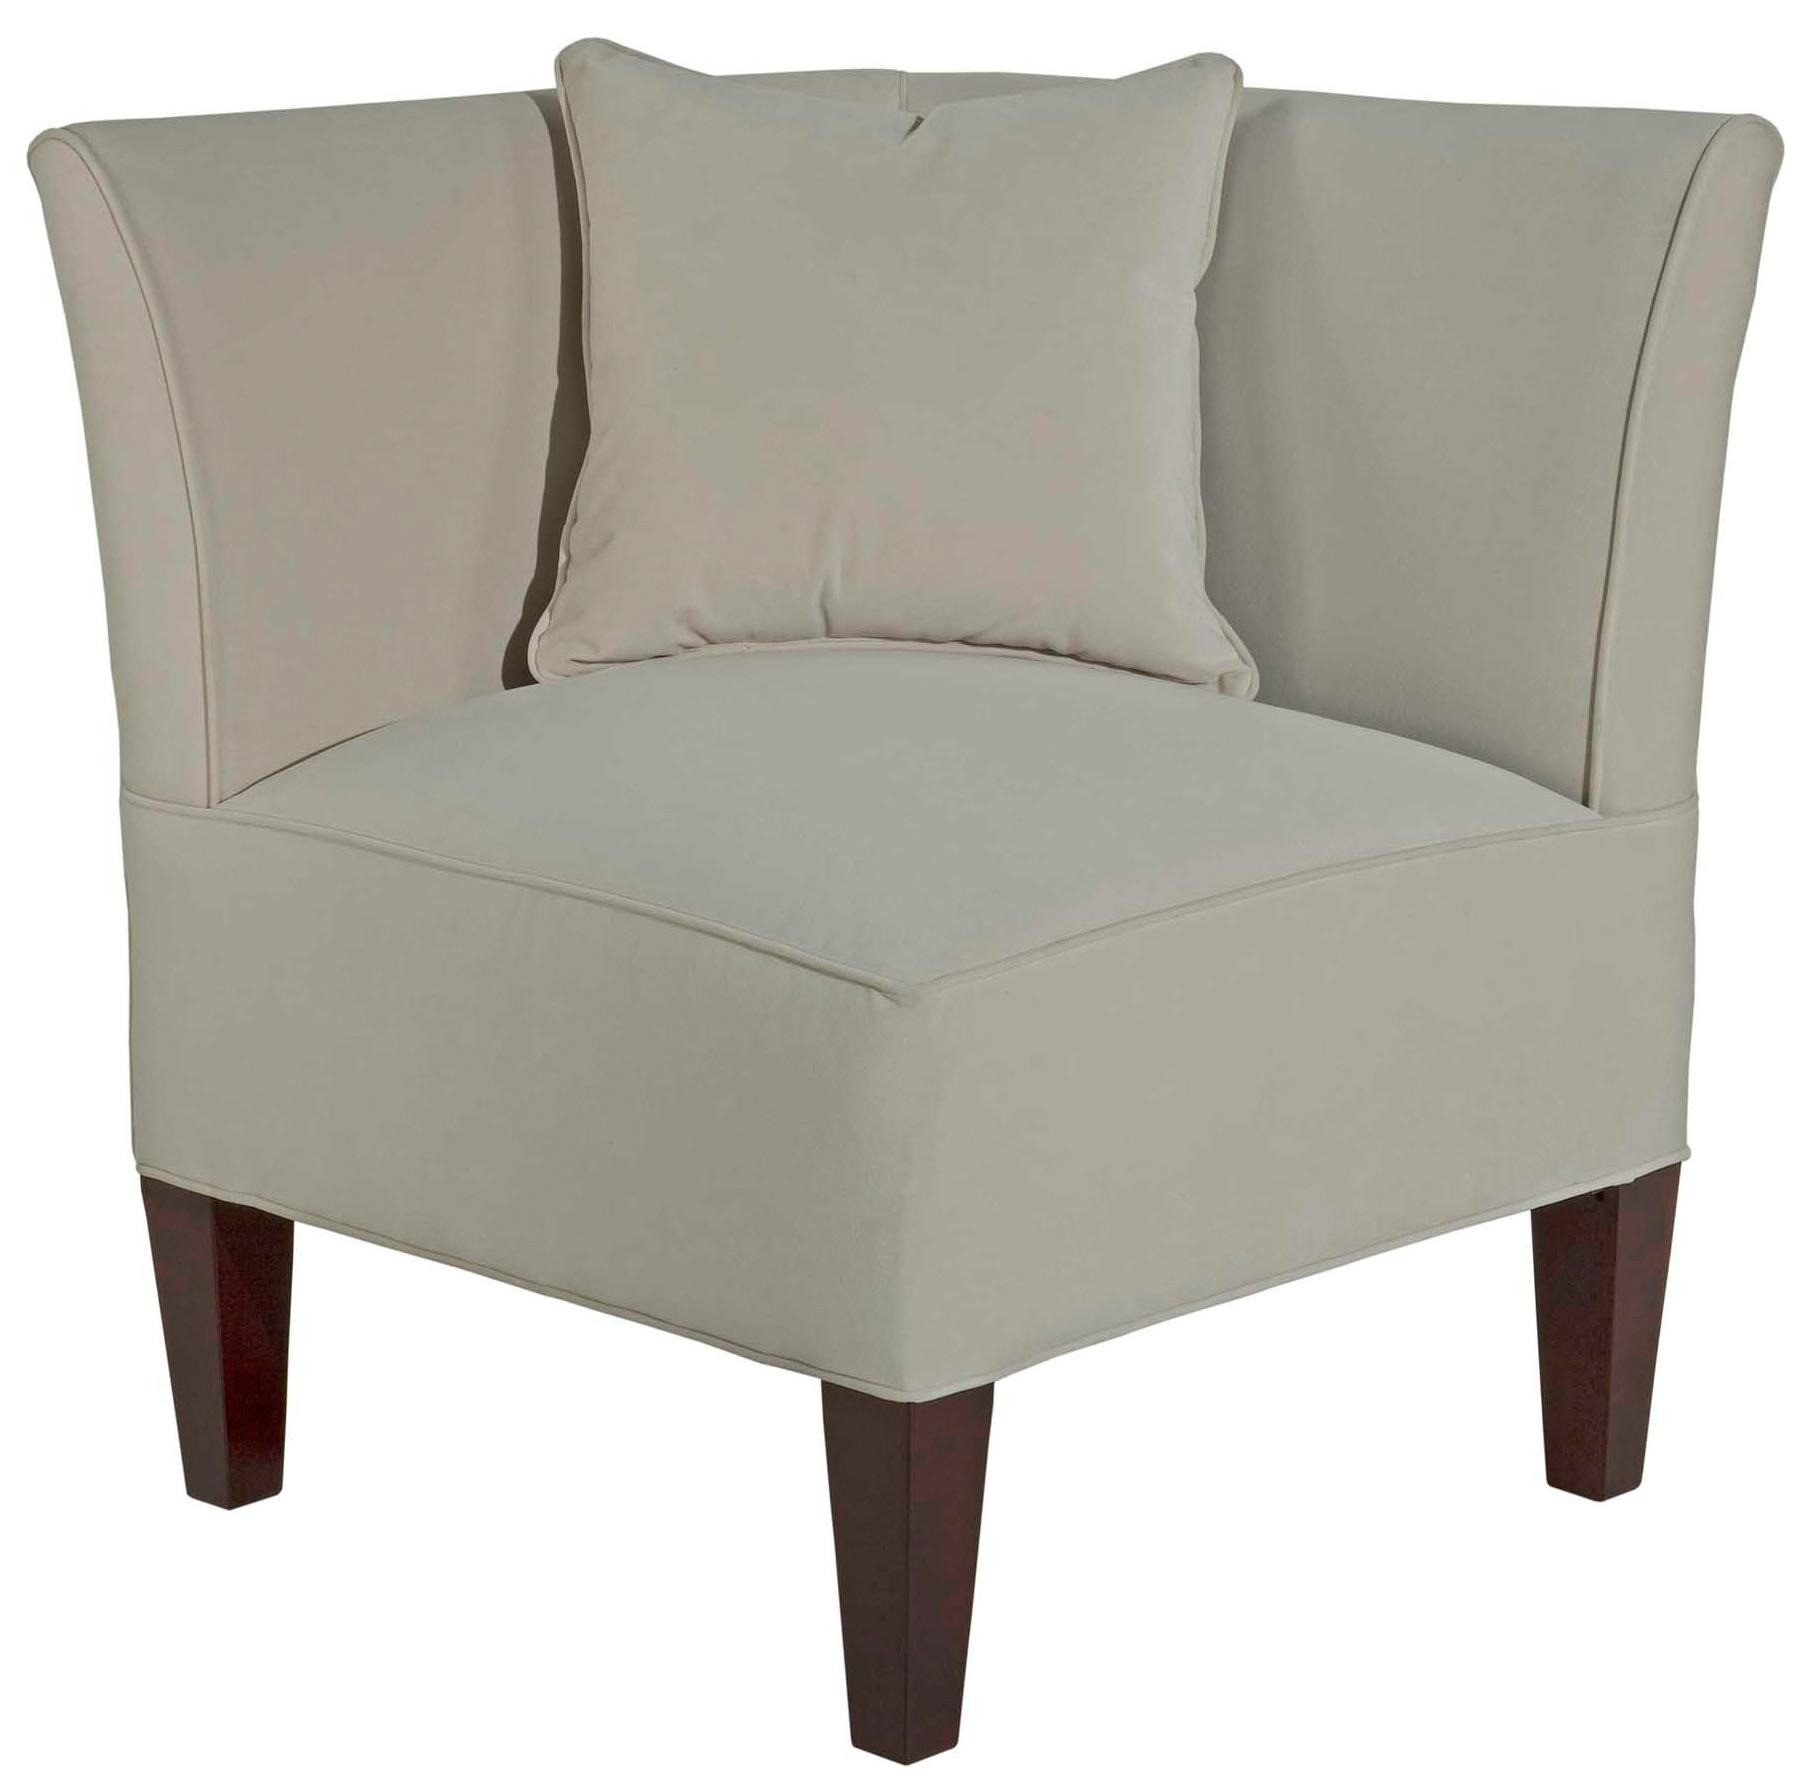 Small Accent Chairs For Bedroom
 Broyhill Bedroom Sets Small Accent Chairs For Awesome